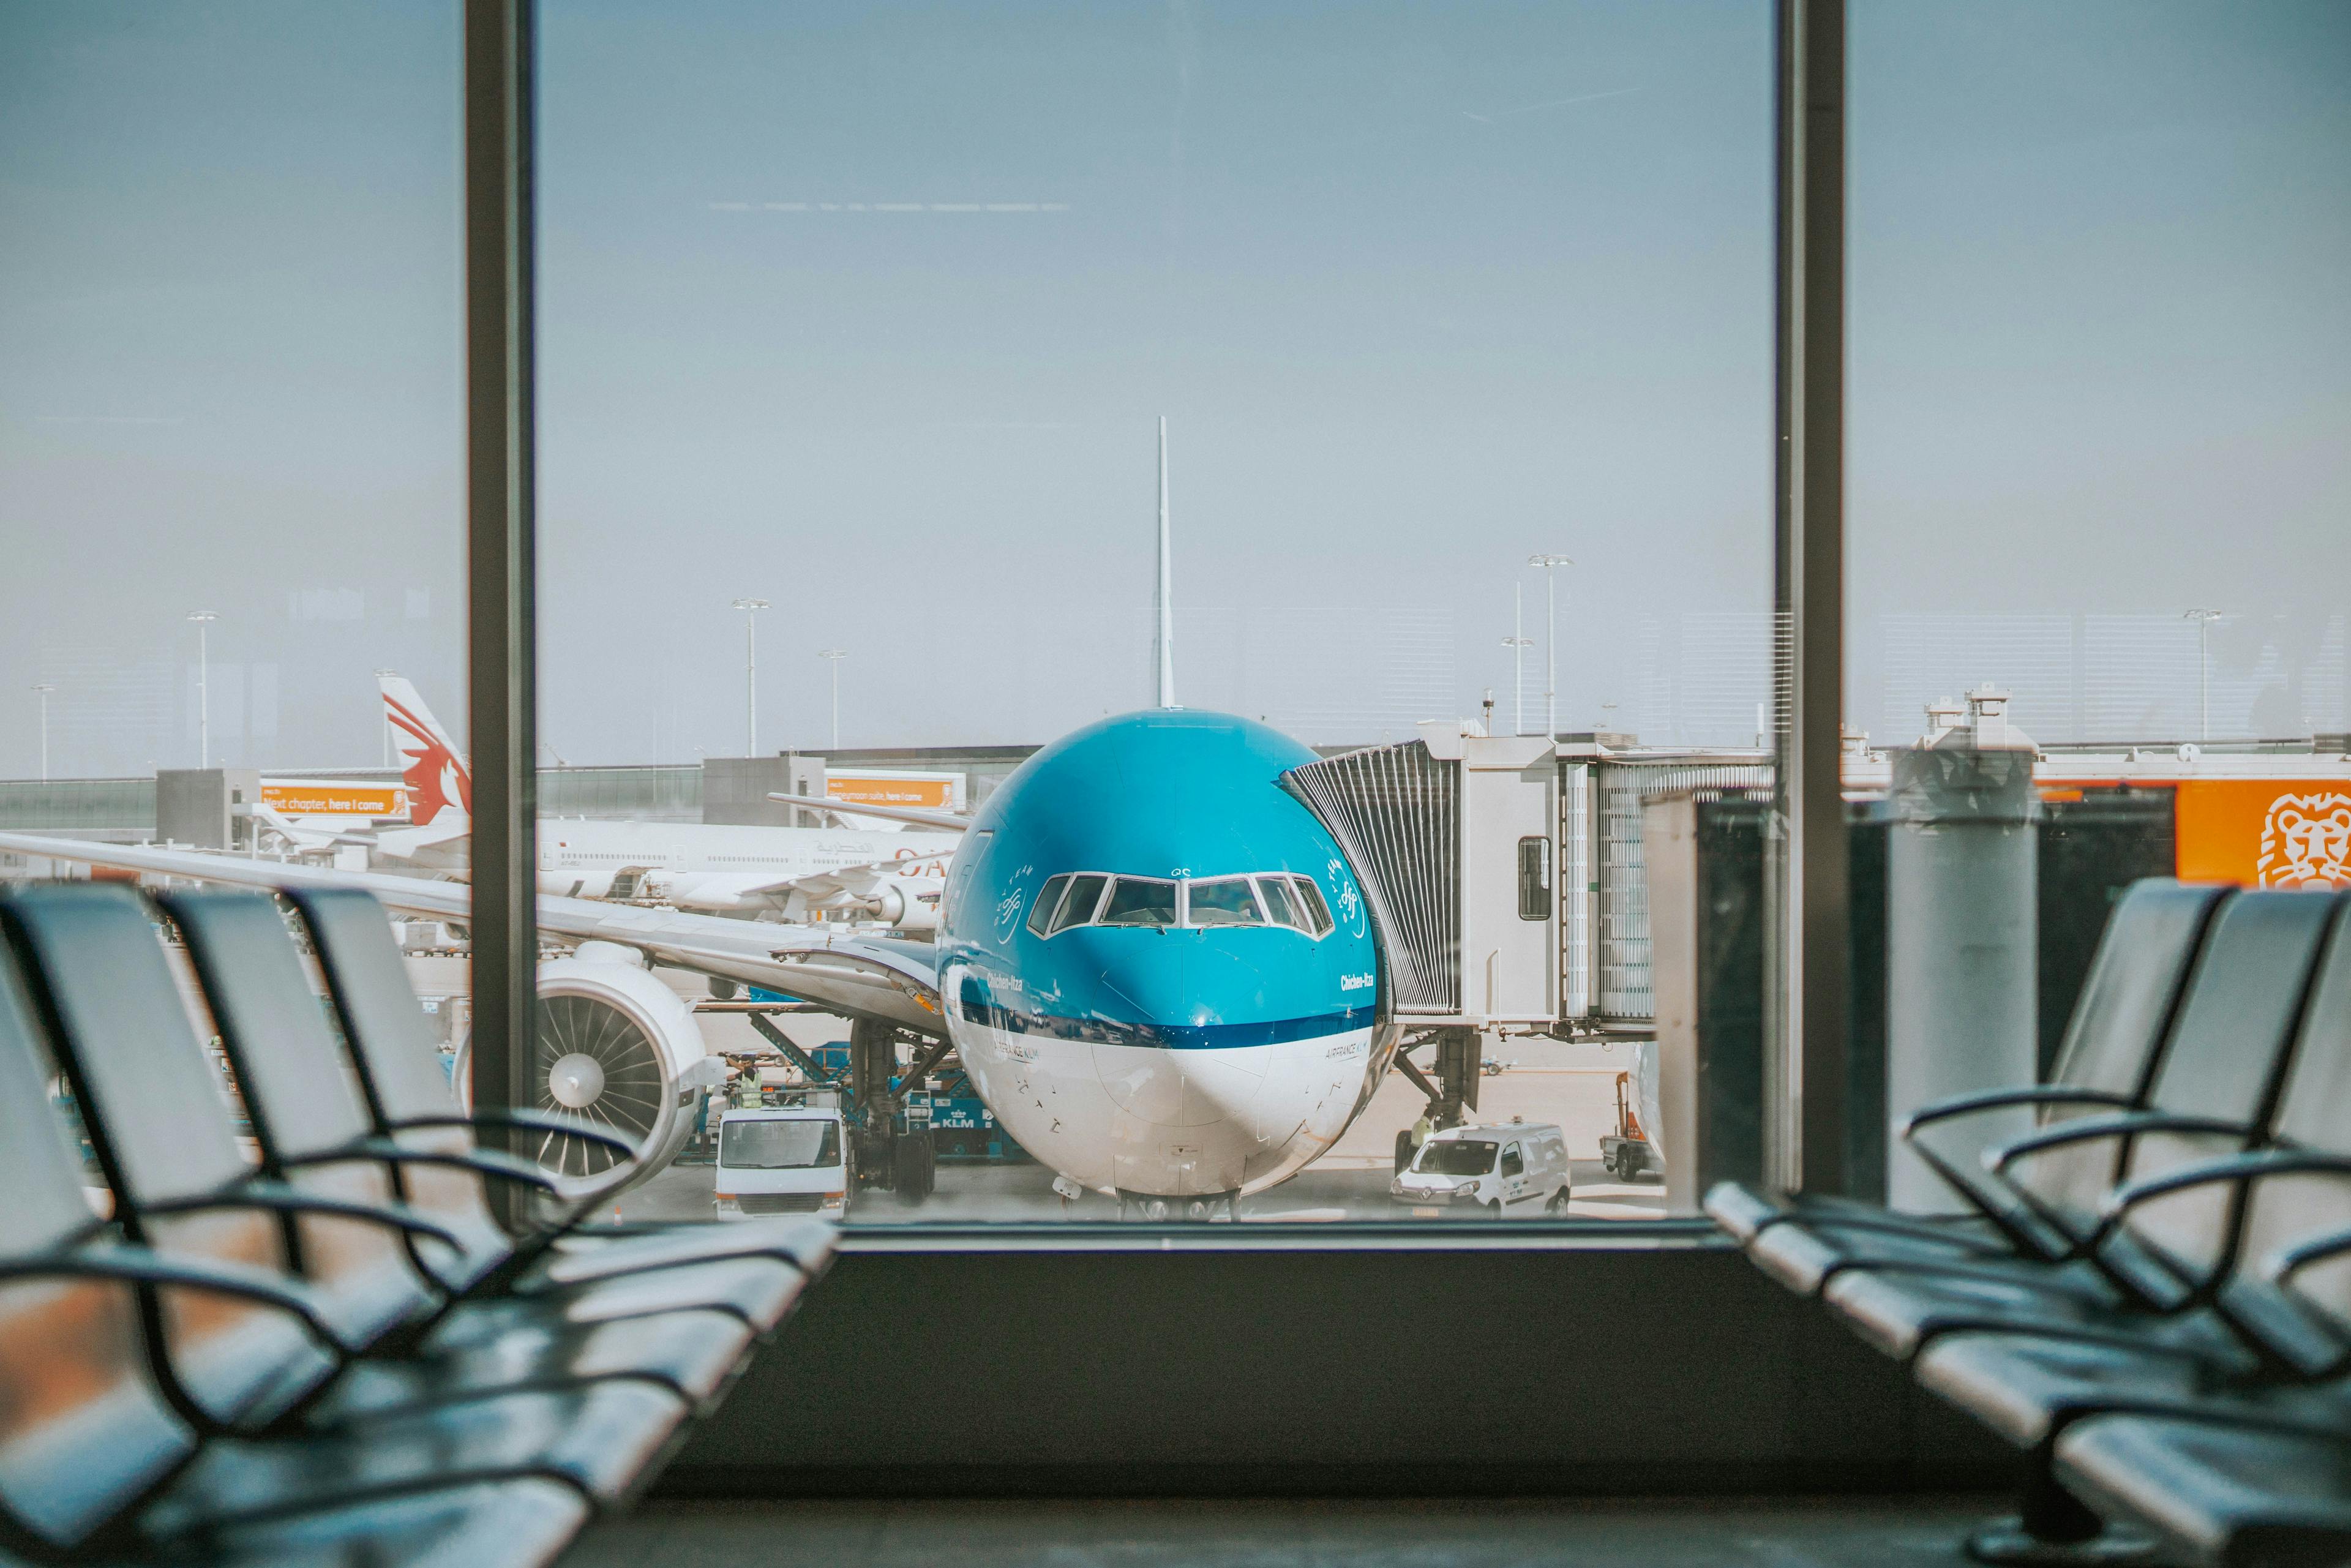 Luxembourg among the leaders in air transportation in Europe